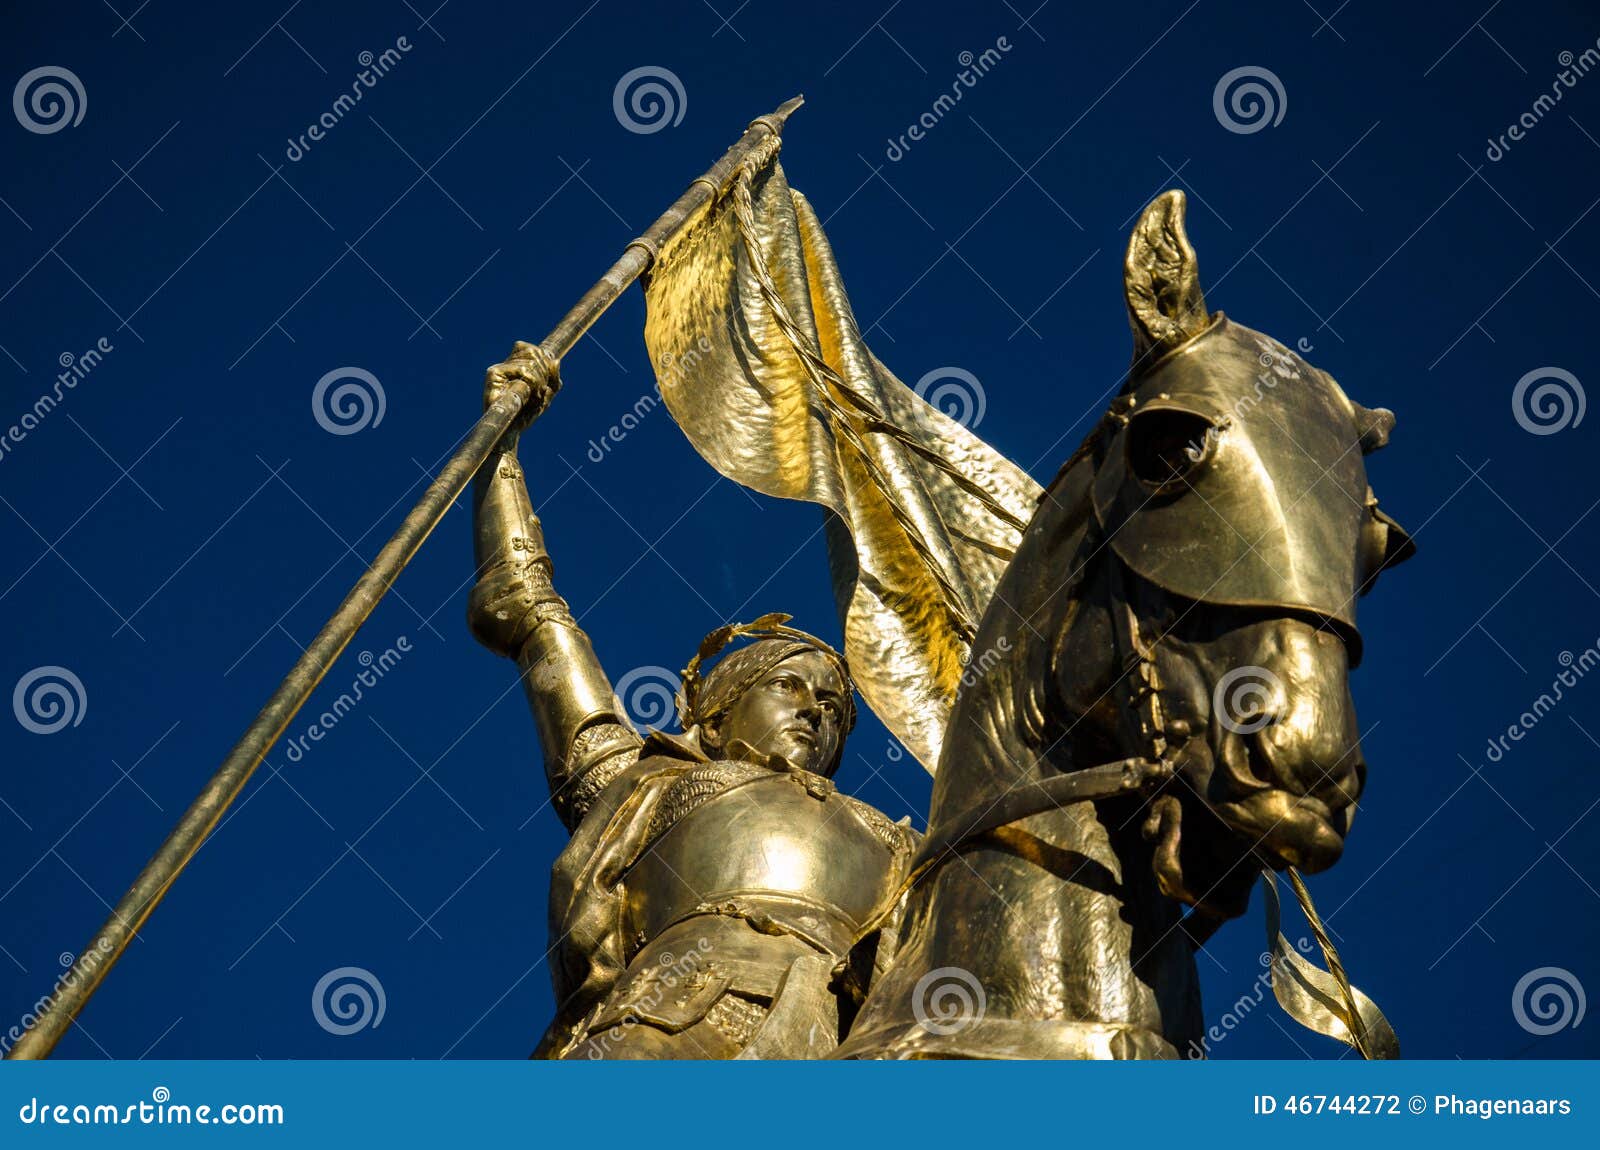 joan of arc - jeanne d'arc - new orleans